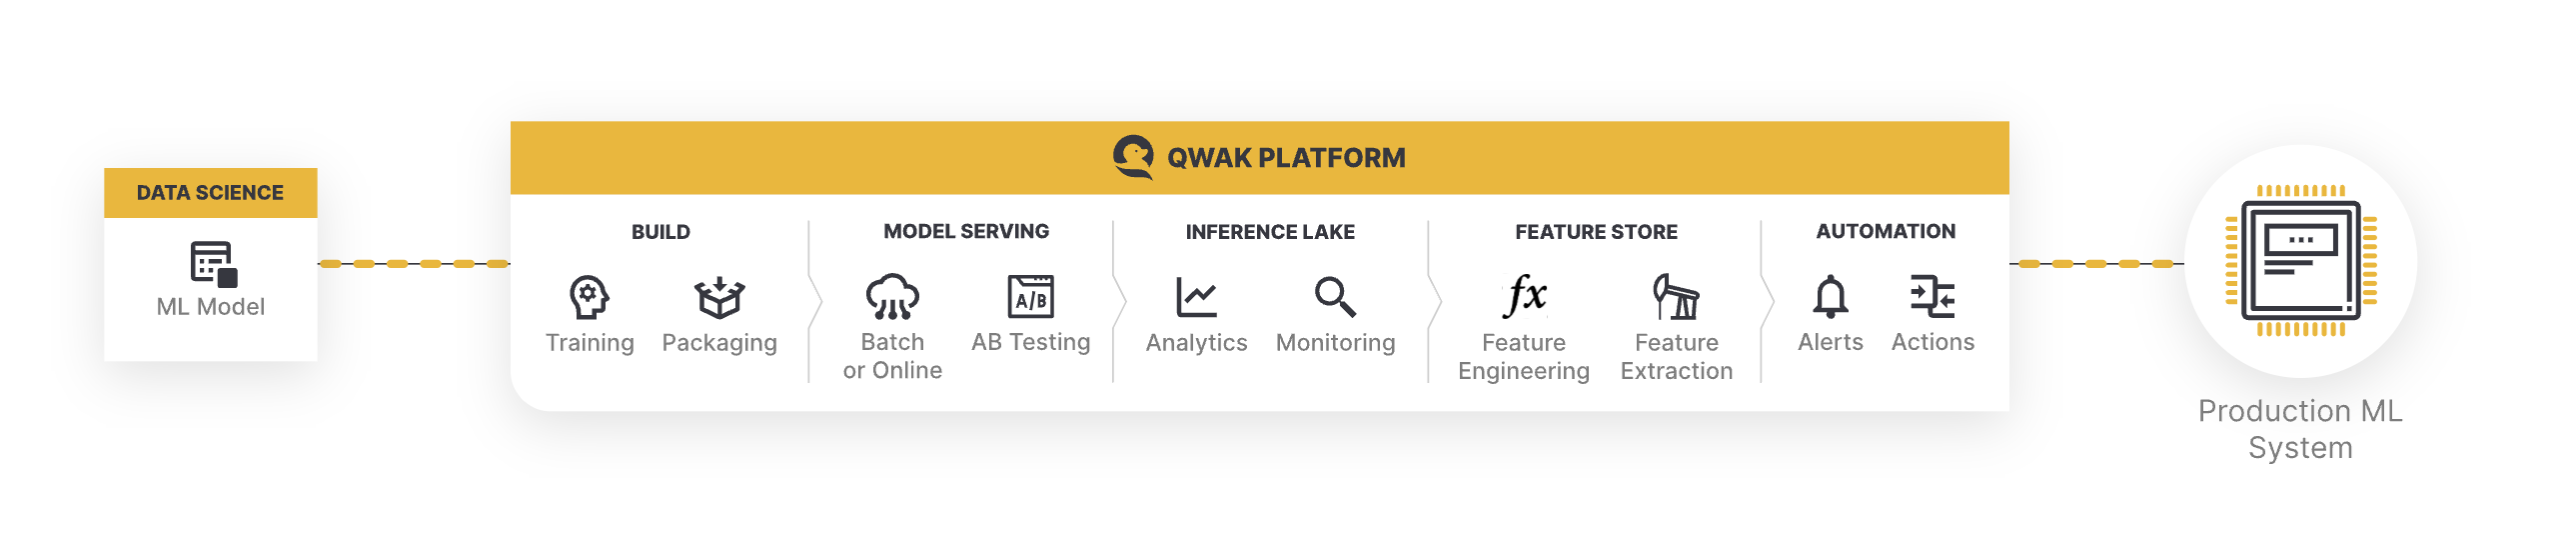 Qwak machine learning overview